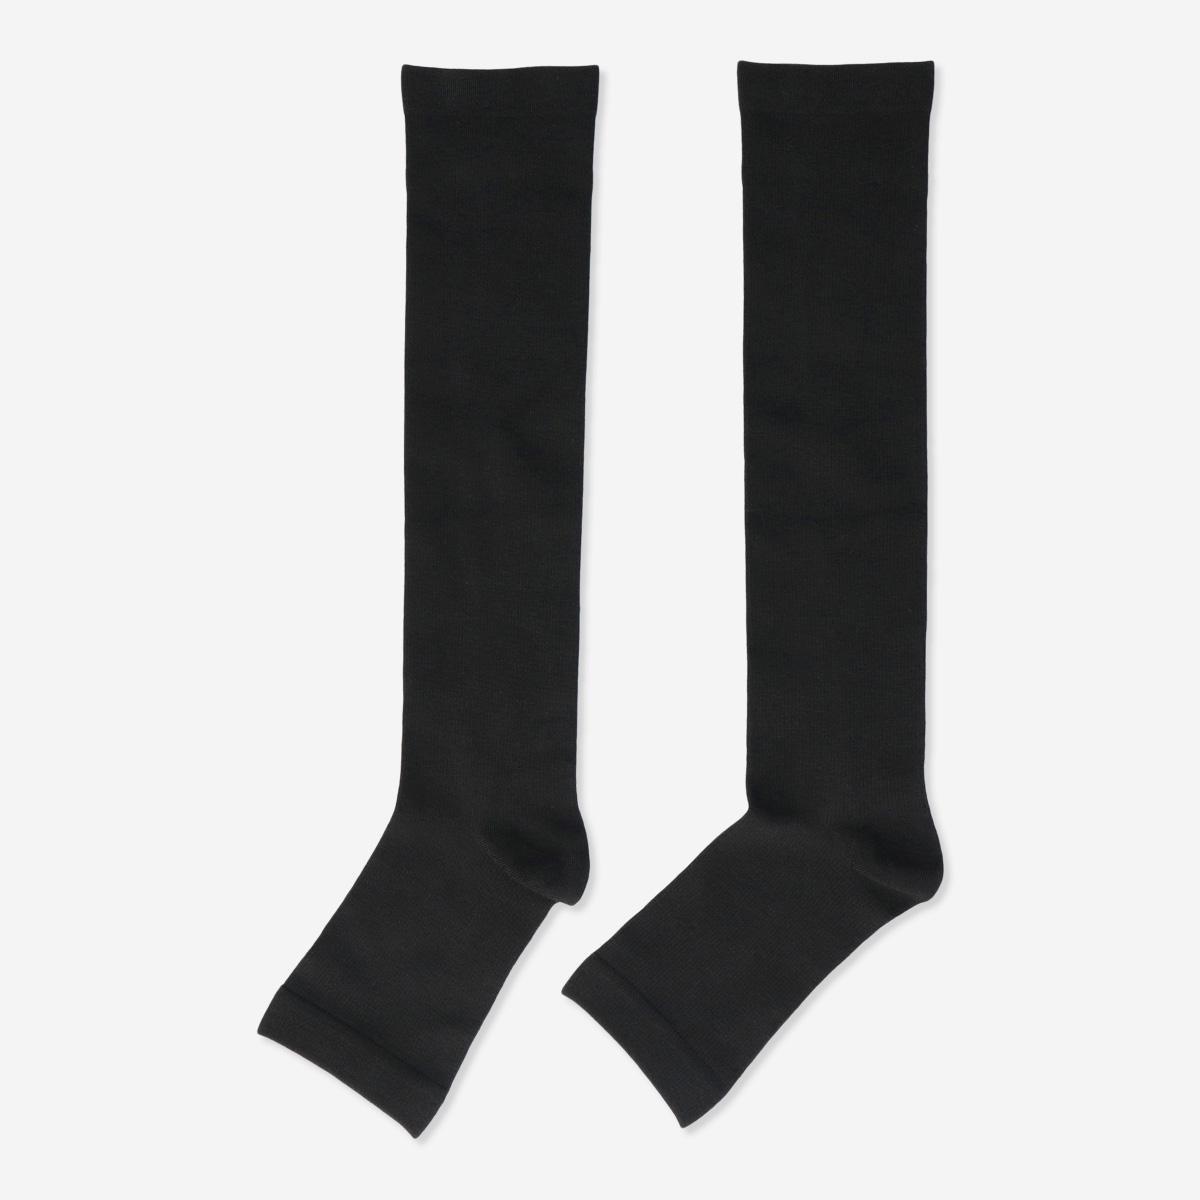 Black support stockings. l/xl